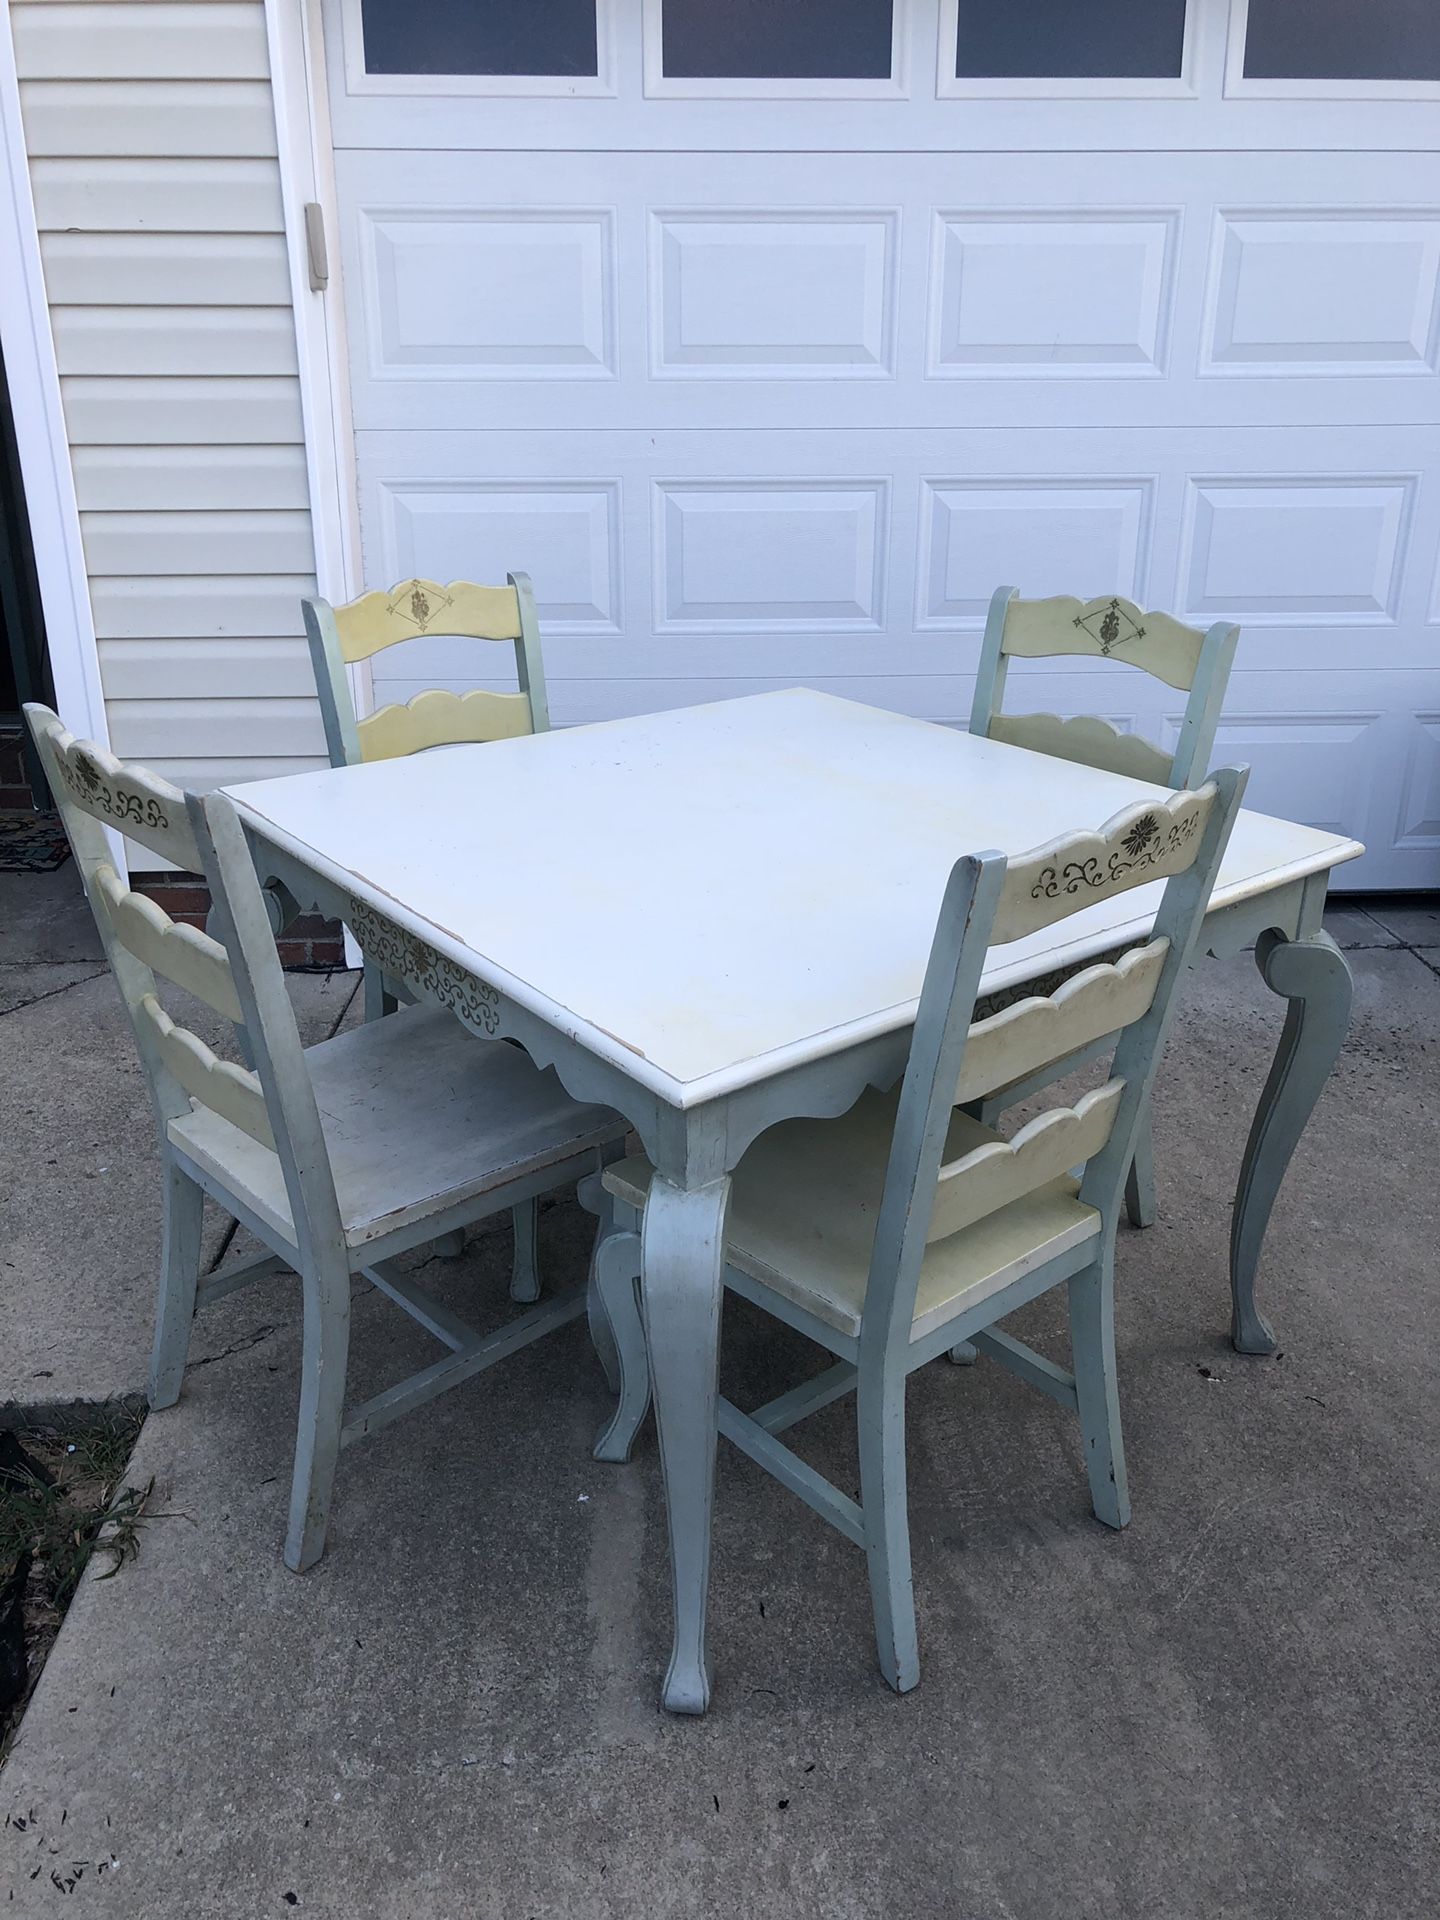 Pier 1 Imports Kitchen Table With 4 Chairs